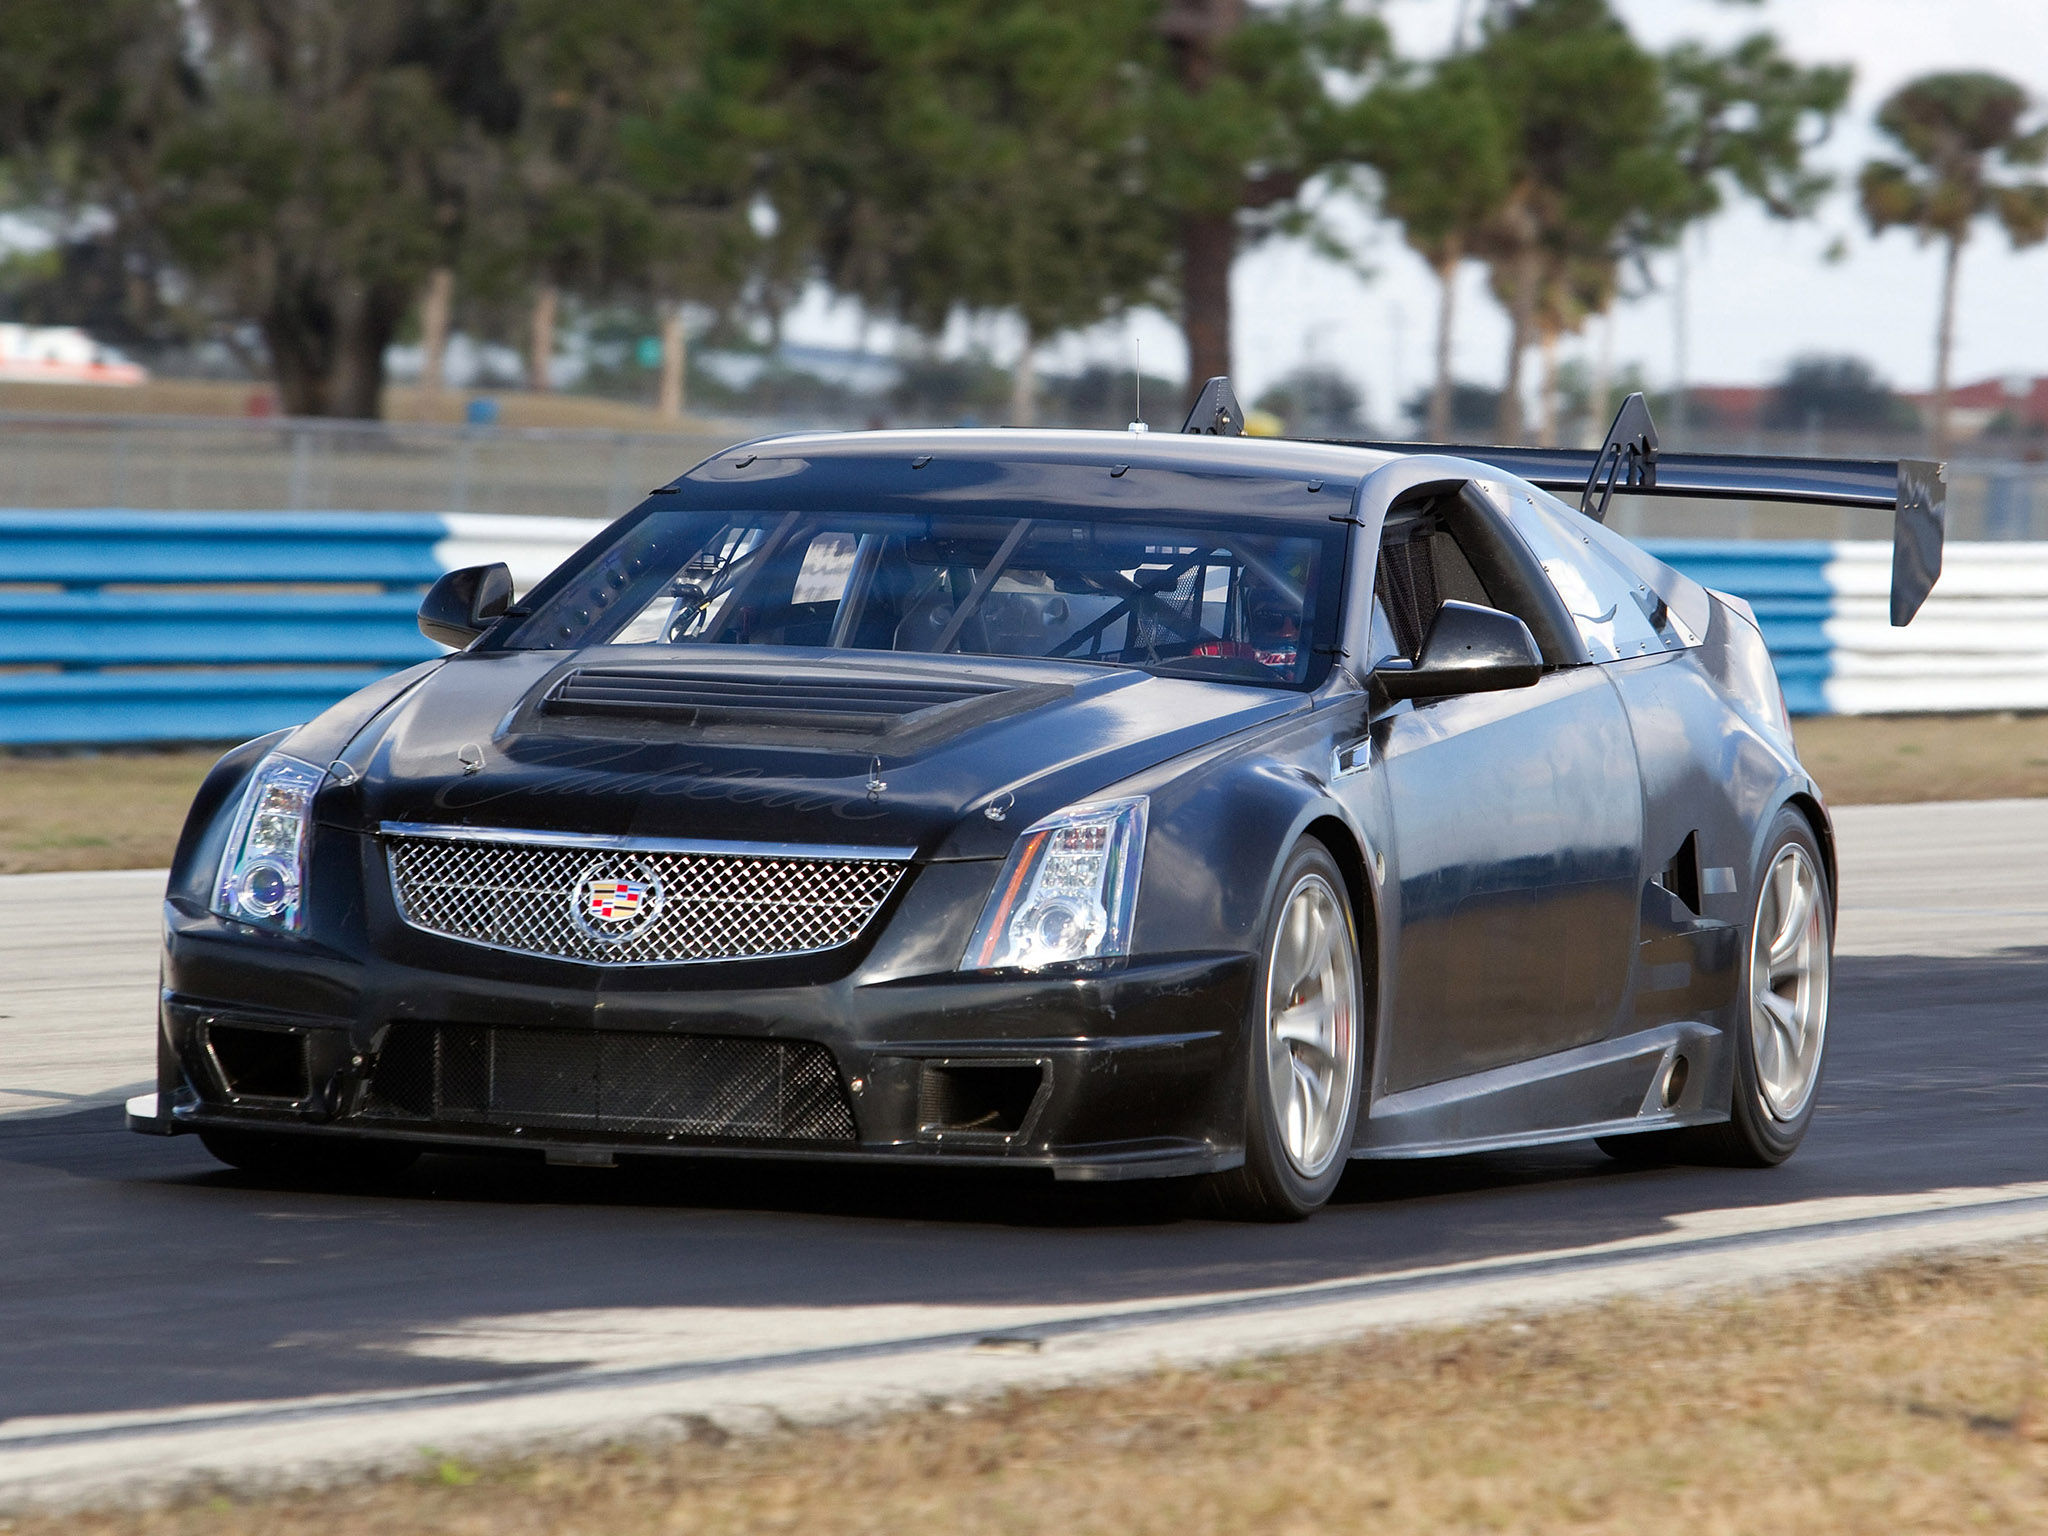 2011, Cadillac, Cts v, Racing, Coupe, Race, Muscle, Gd Wallpaper